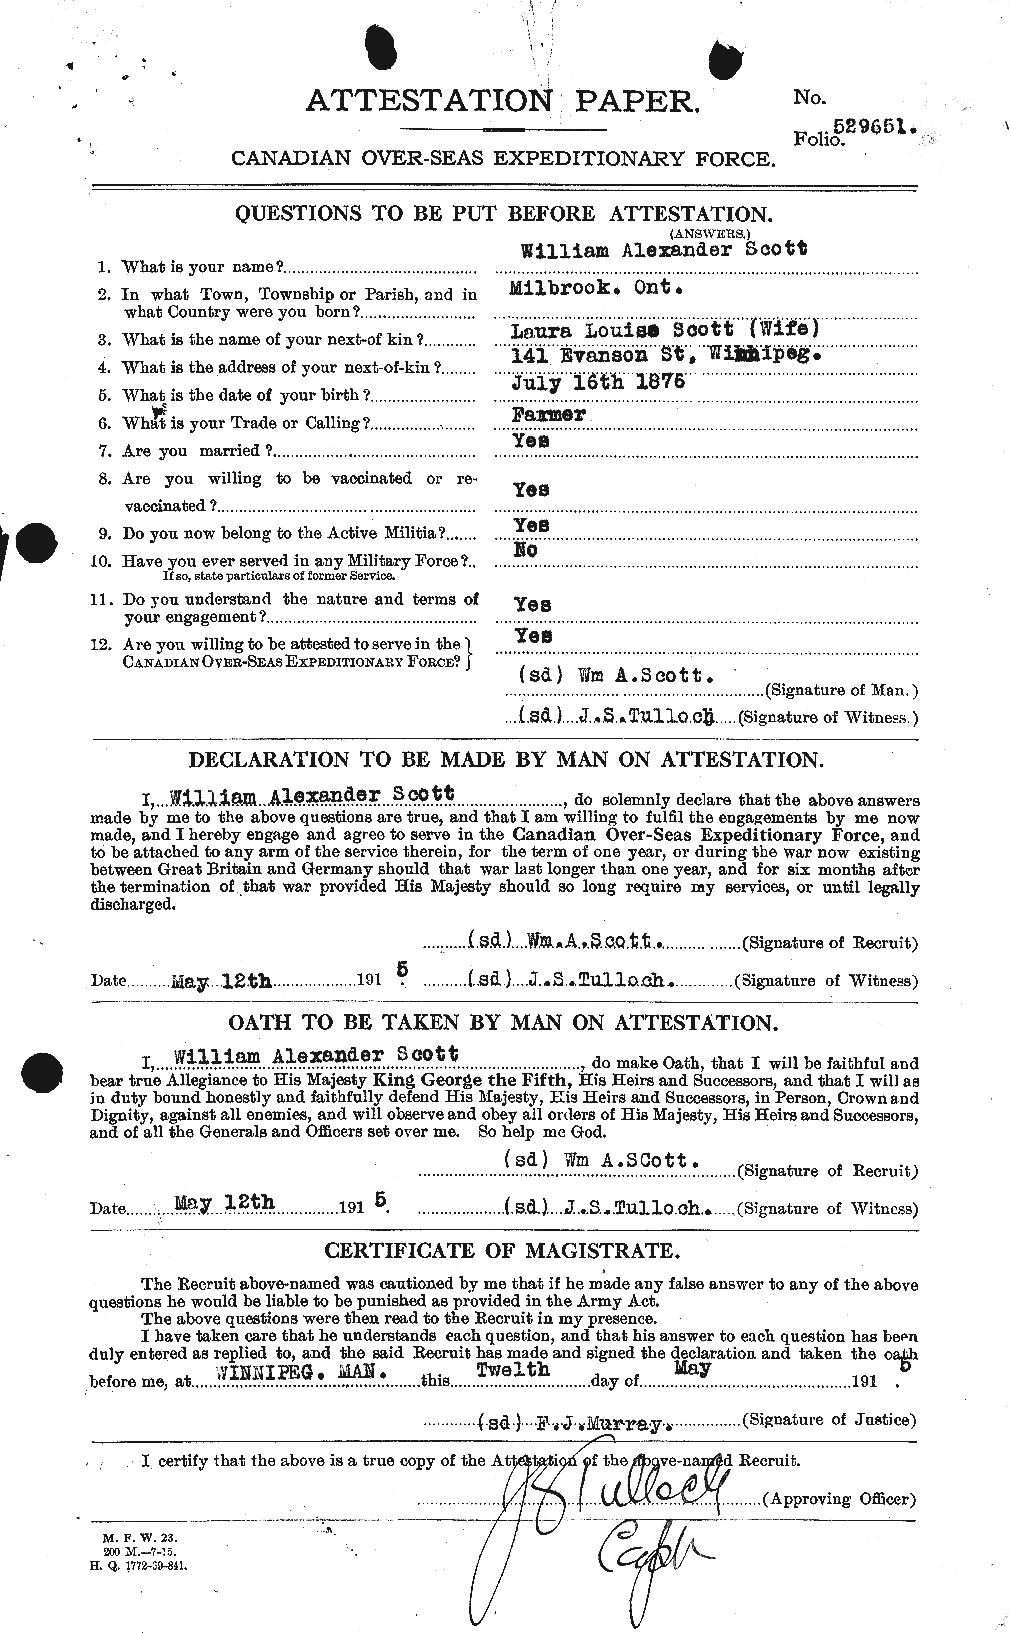 Personnel Records of the First World War - CEF 087336a